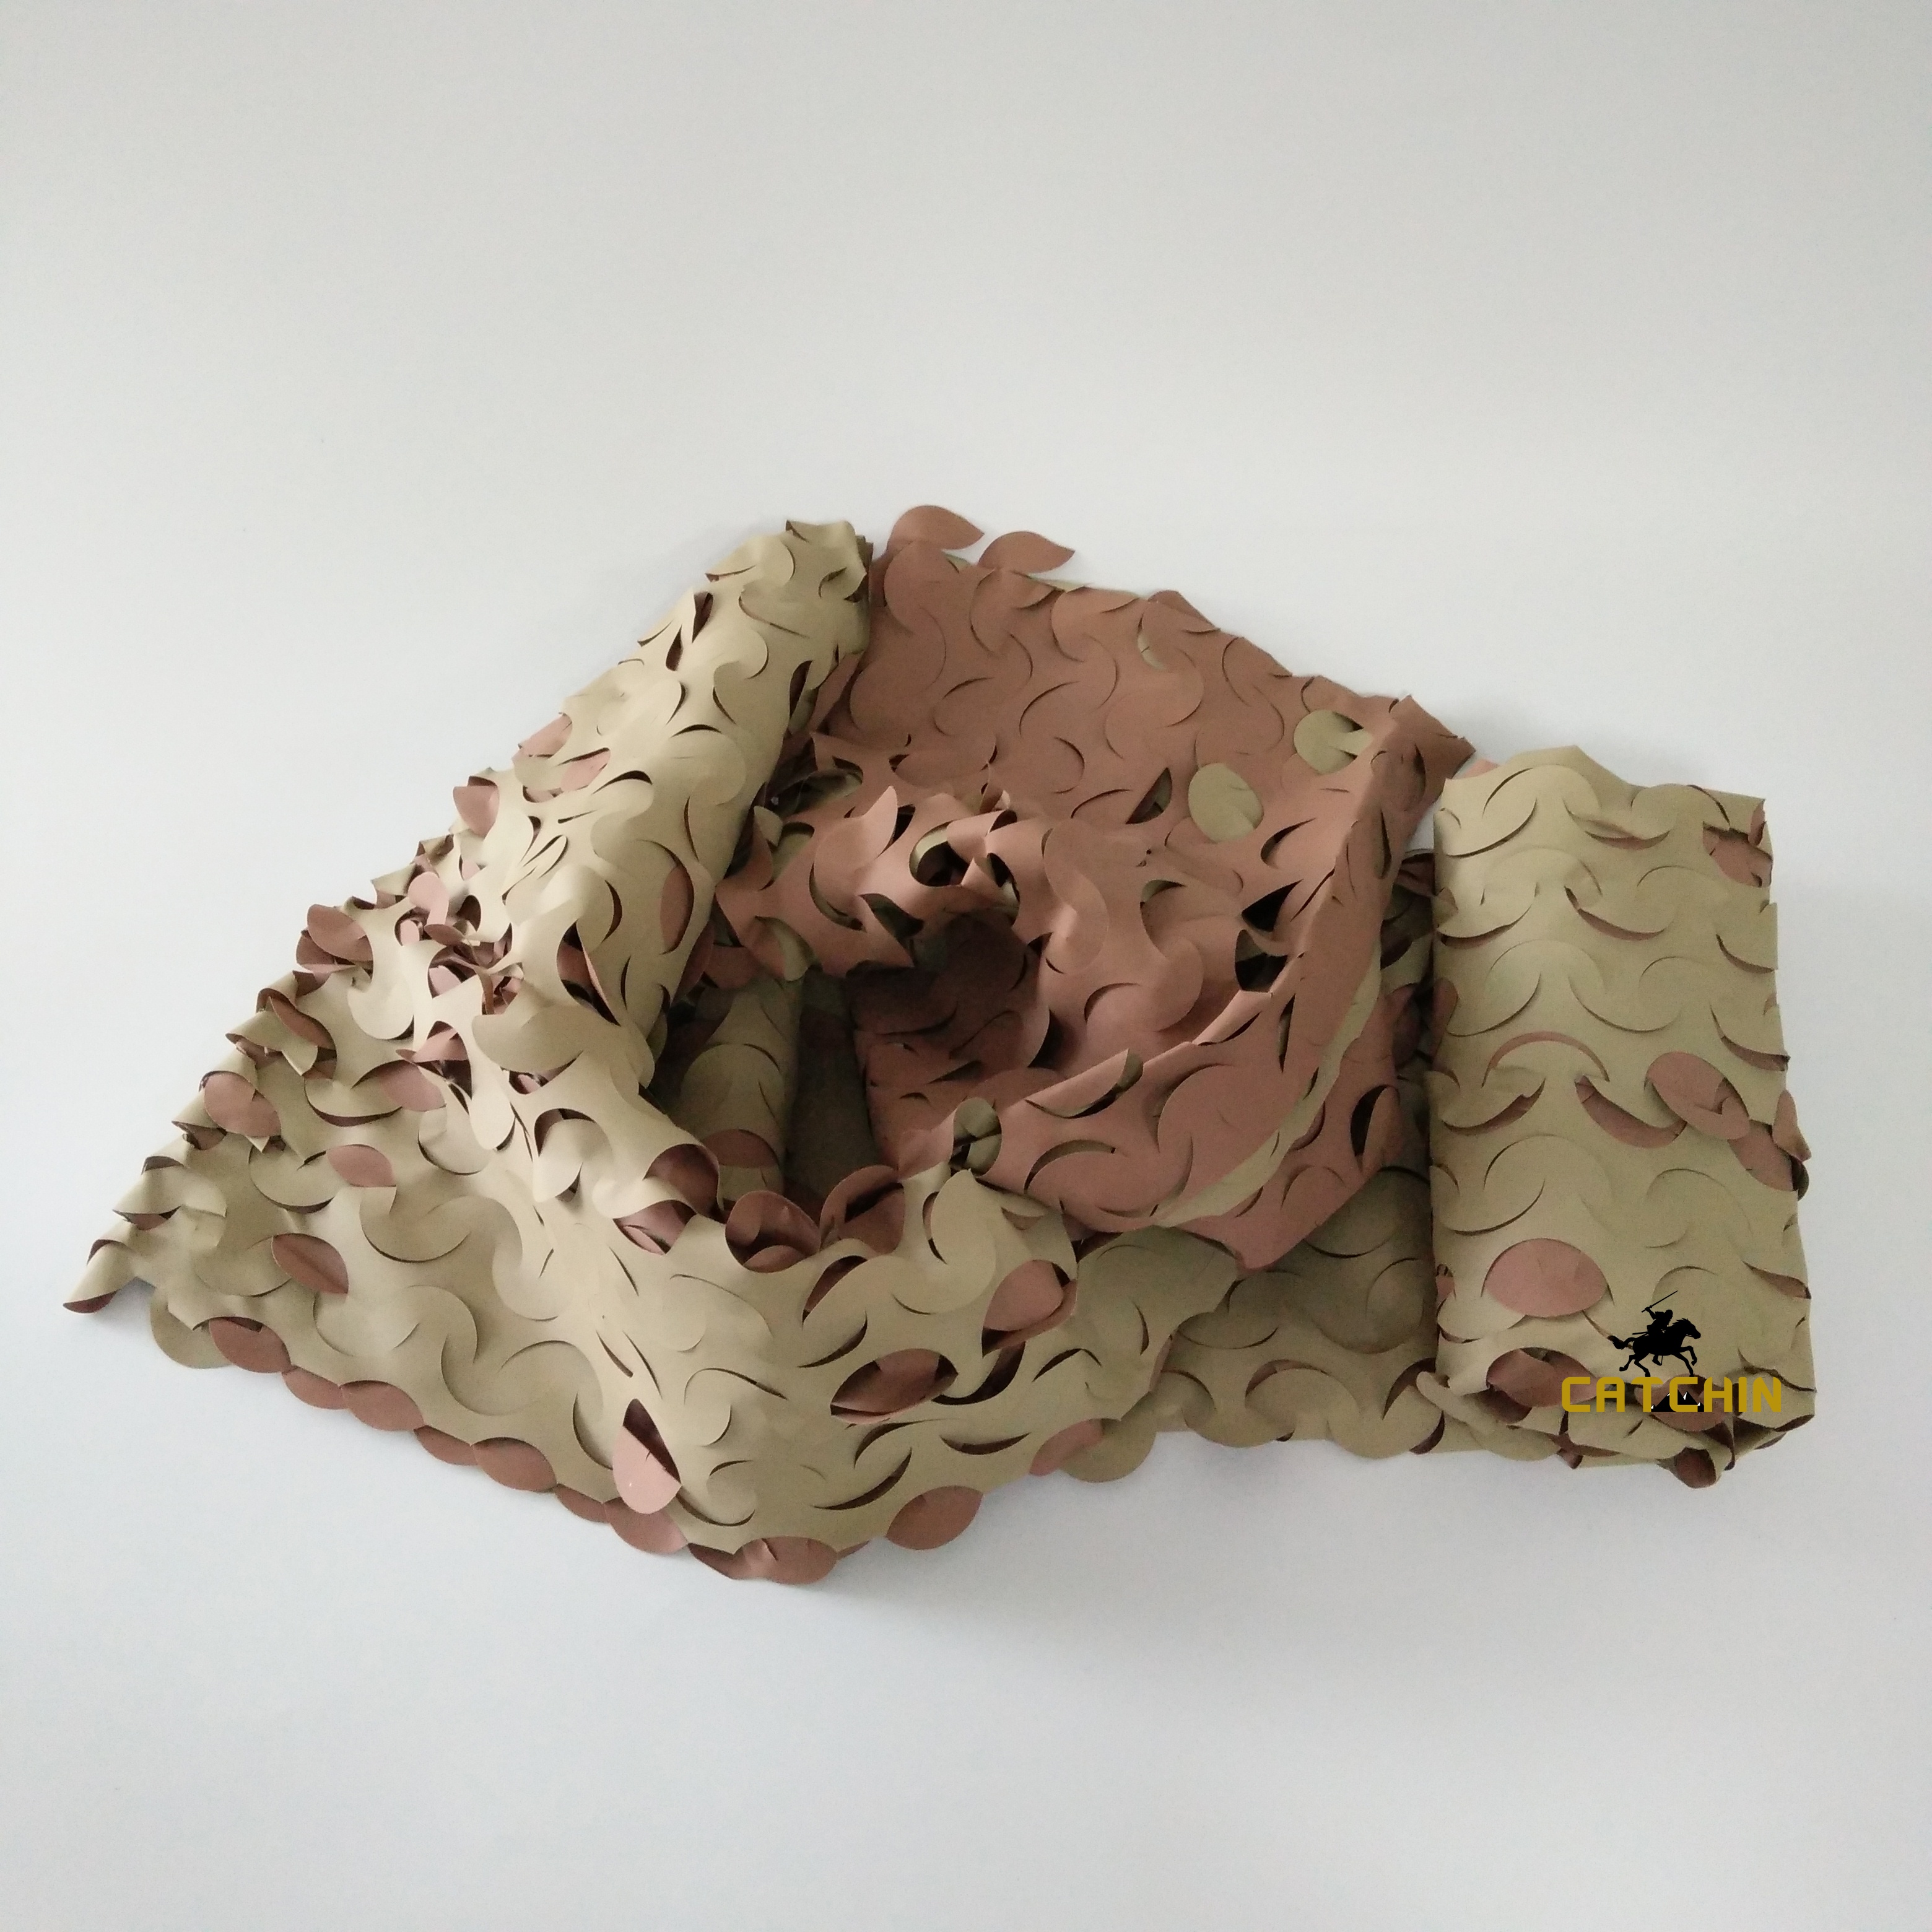 Bi-directional color camouflage net Brown&Sandy camo netting hunting net camouflage fabric in beach outdoor military usage